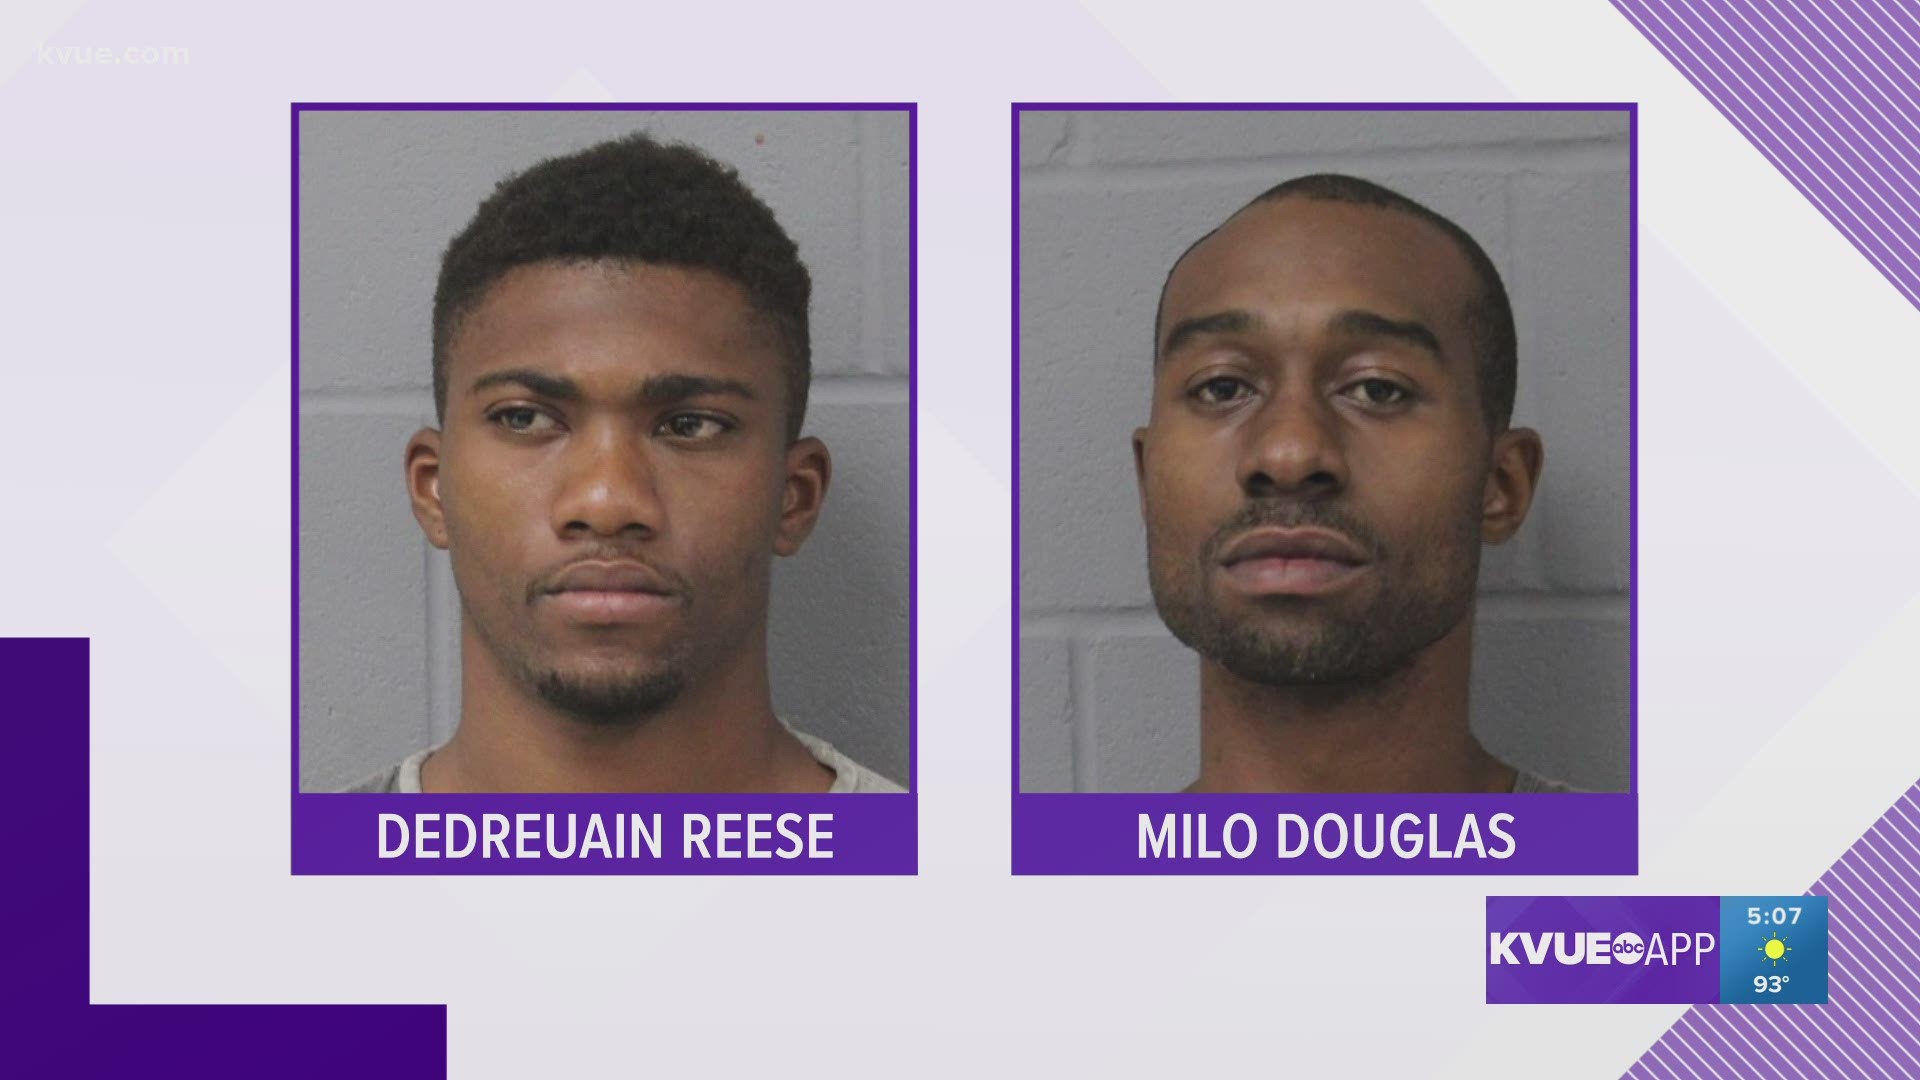 Dedreuain Reese and Milo Douglas were arrested in connection with the death of Lauren Gums on July 7.